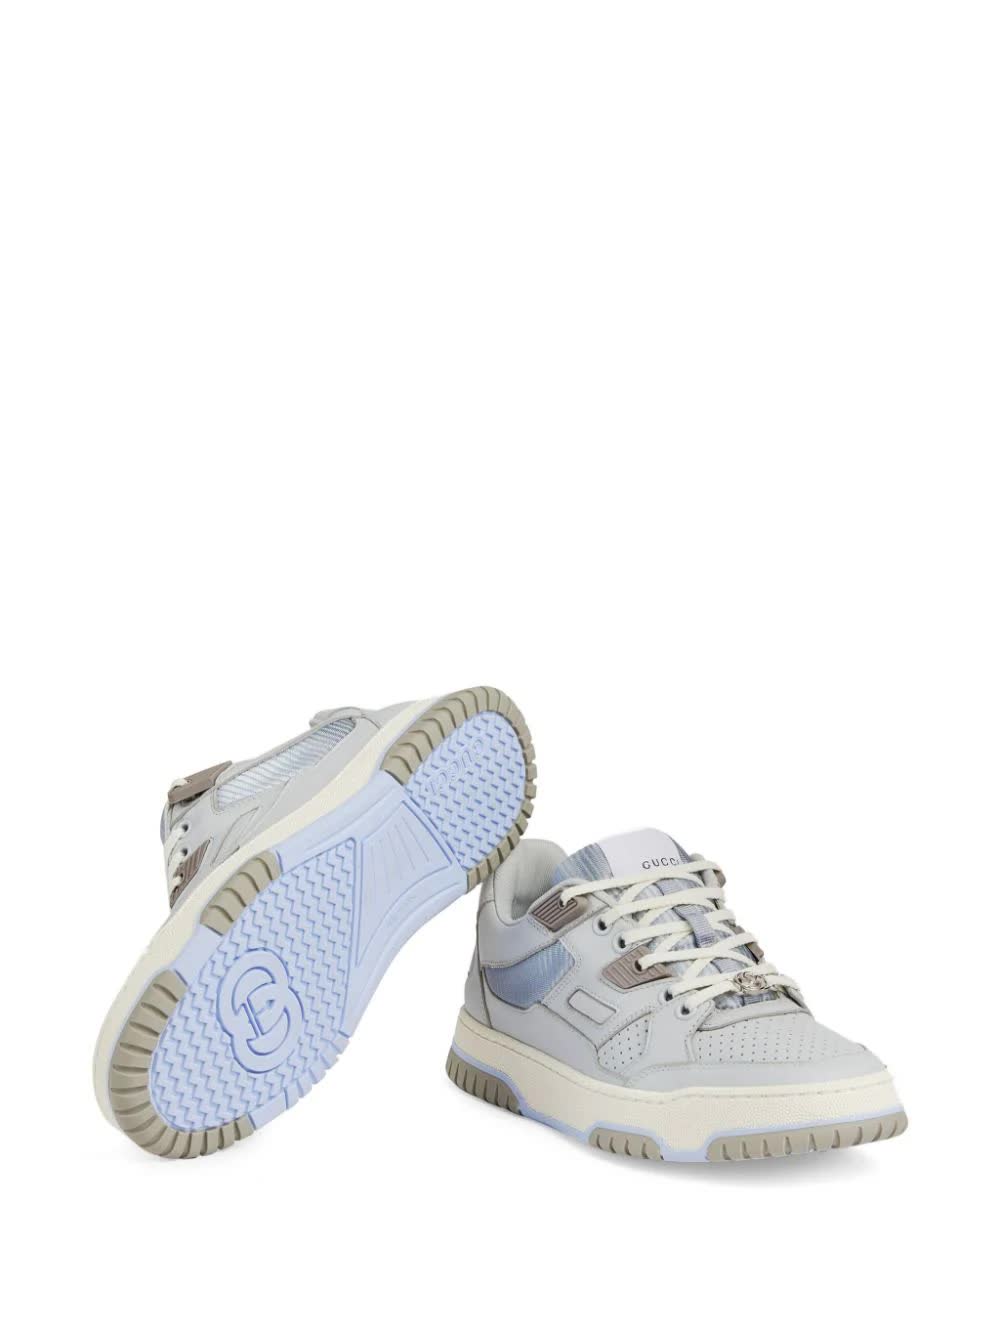 Gucci, Panelled Low-Top Sneakers